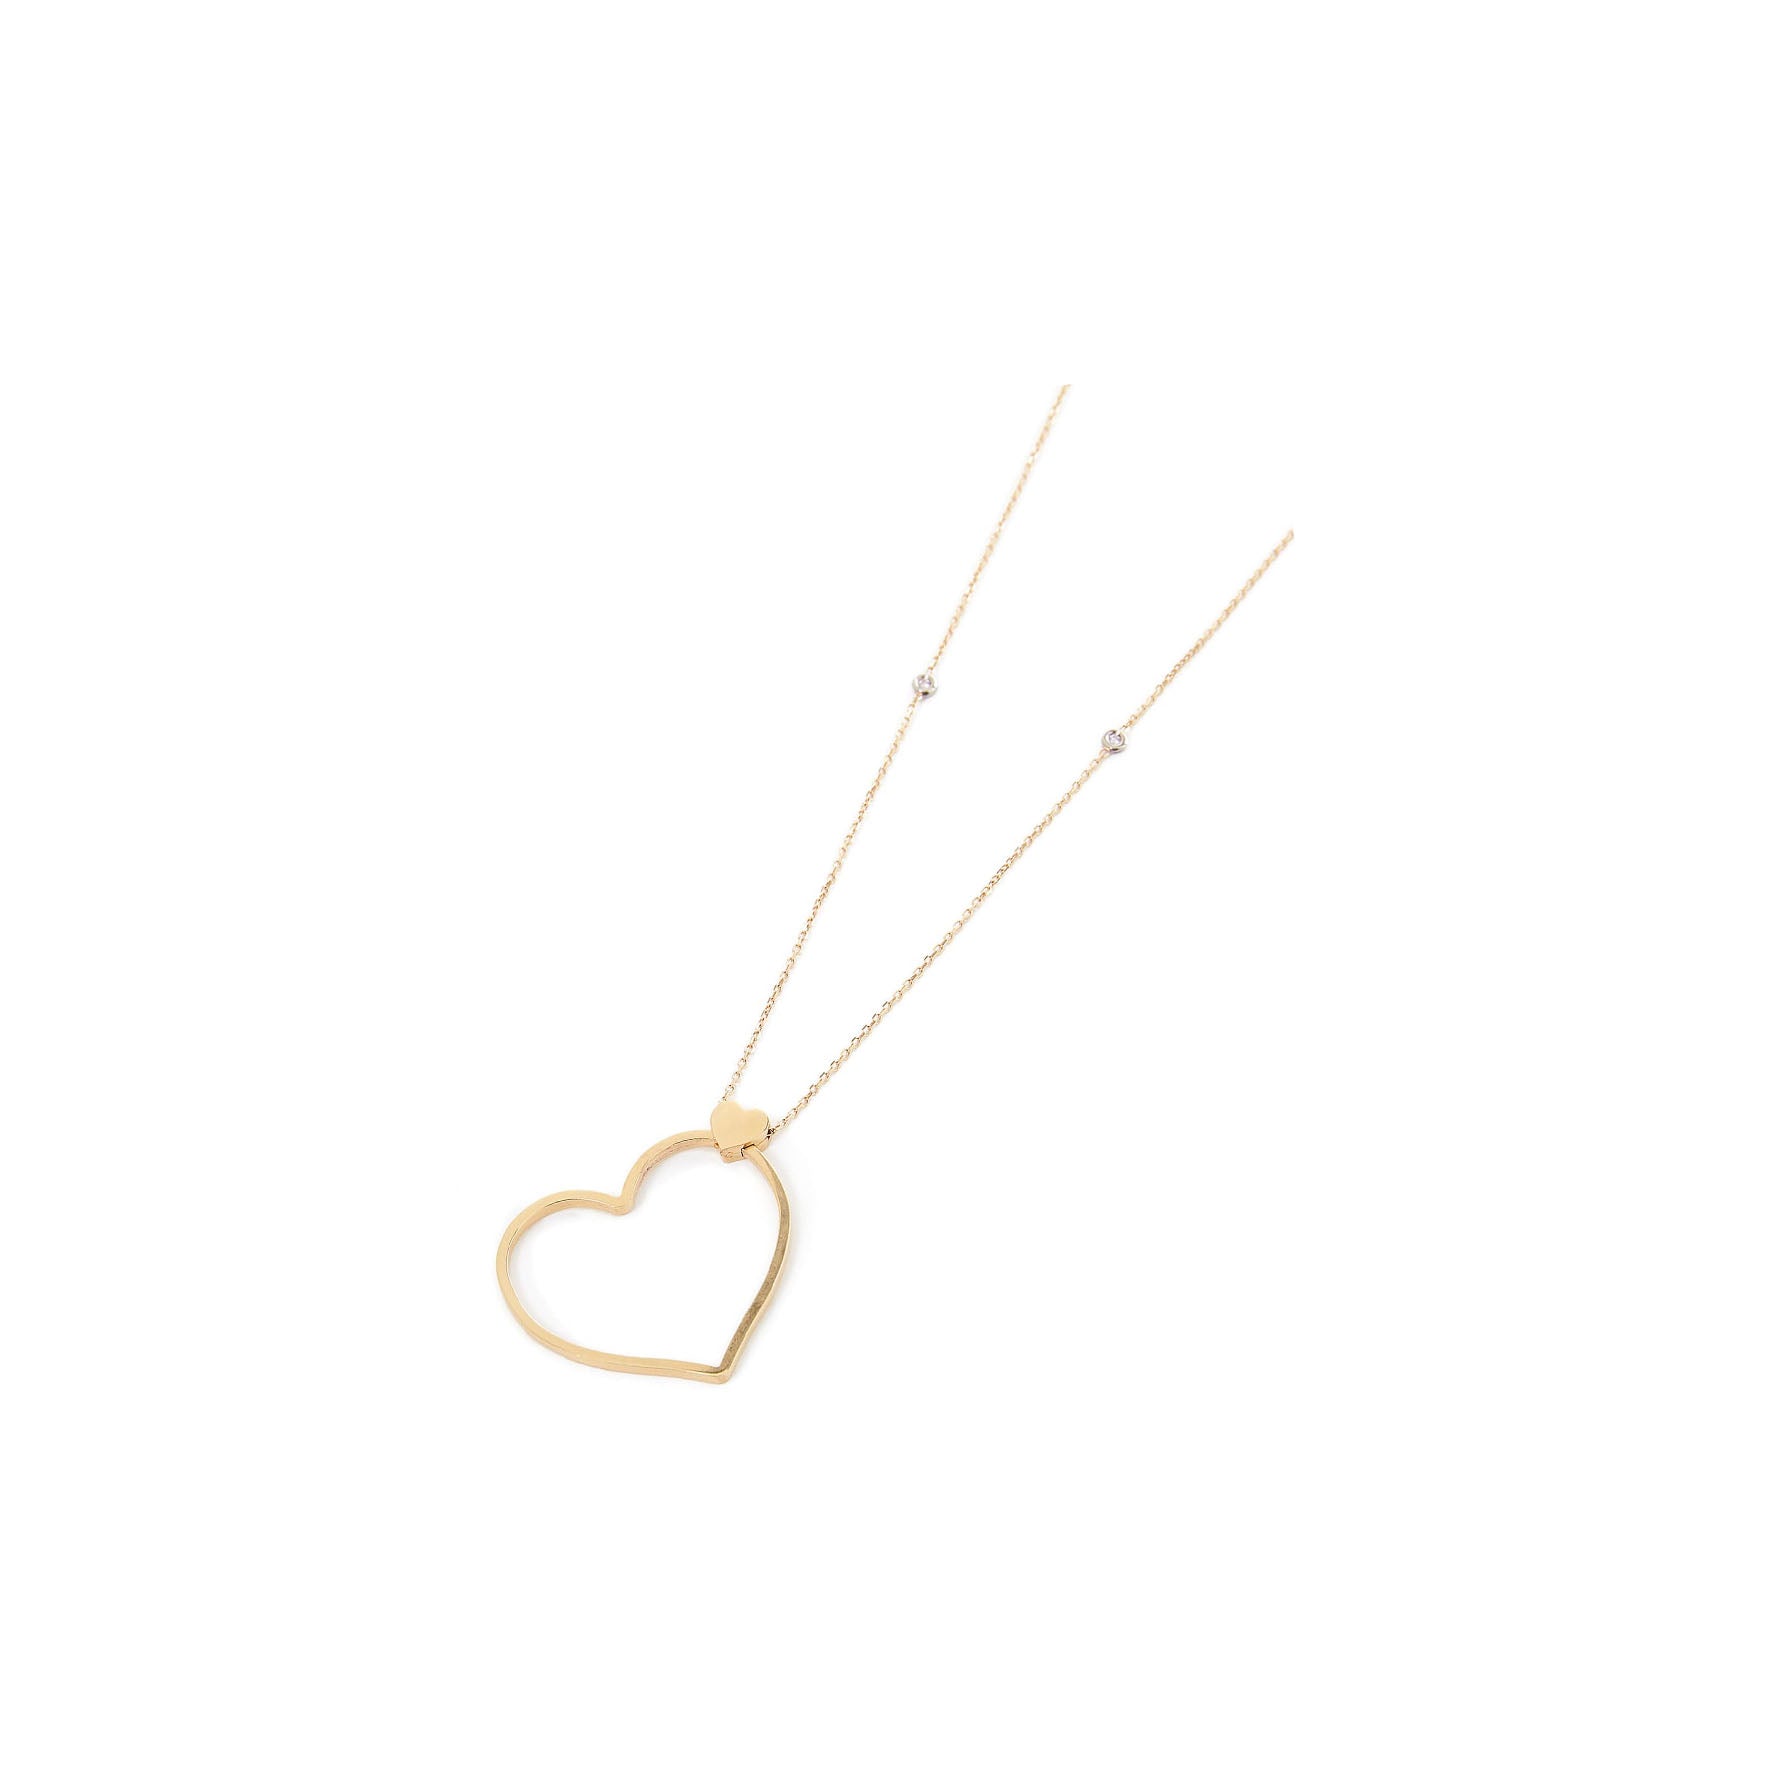 Unoaerre Long gold necklace with heart